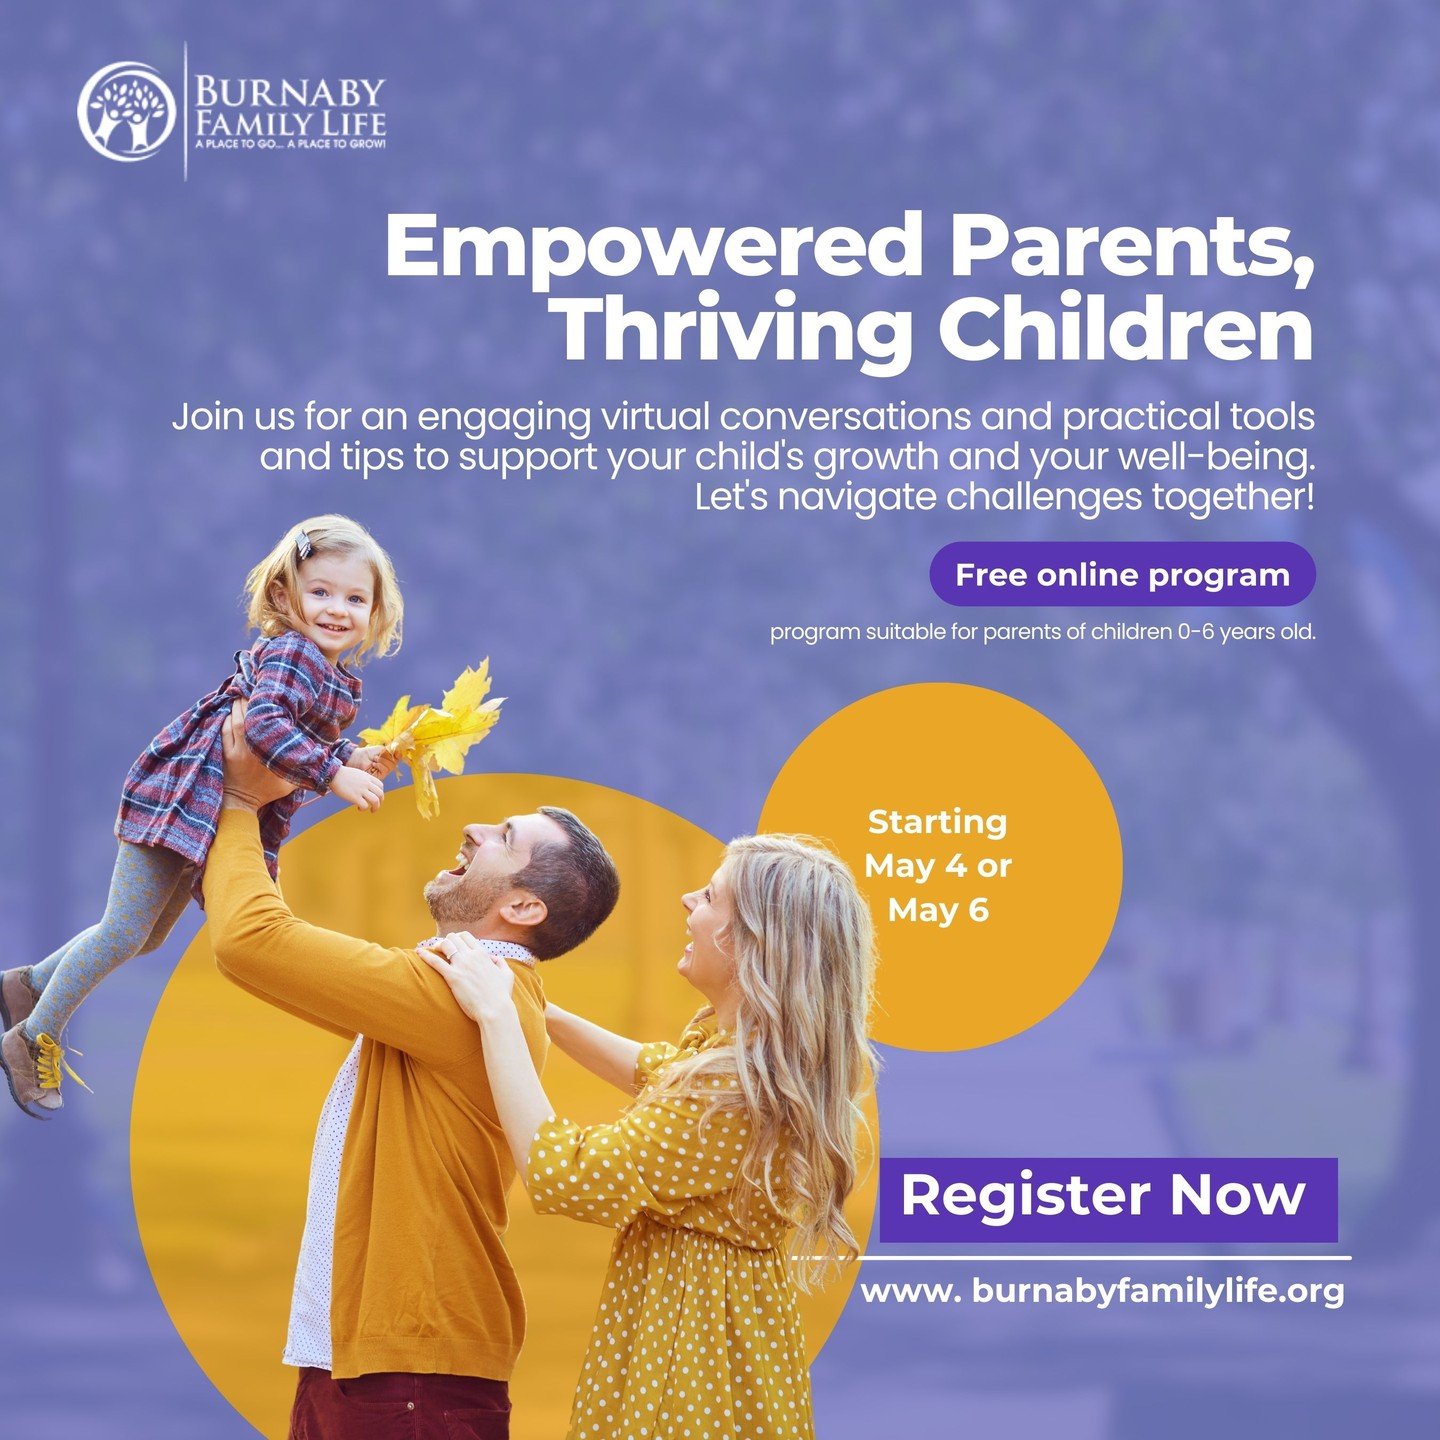 🌟 Empowered Parents, Thriving Children 🌟
In today's world, we're creating safe virtual spaces for parents. Join us in meaningful conversations and gain practical tools and tips to support your child's growth and your well-being. The pandemic taught